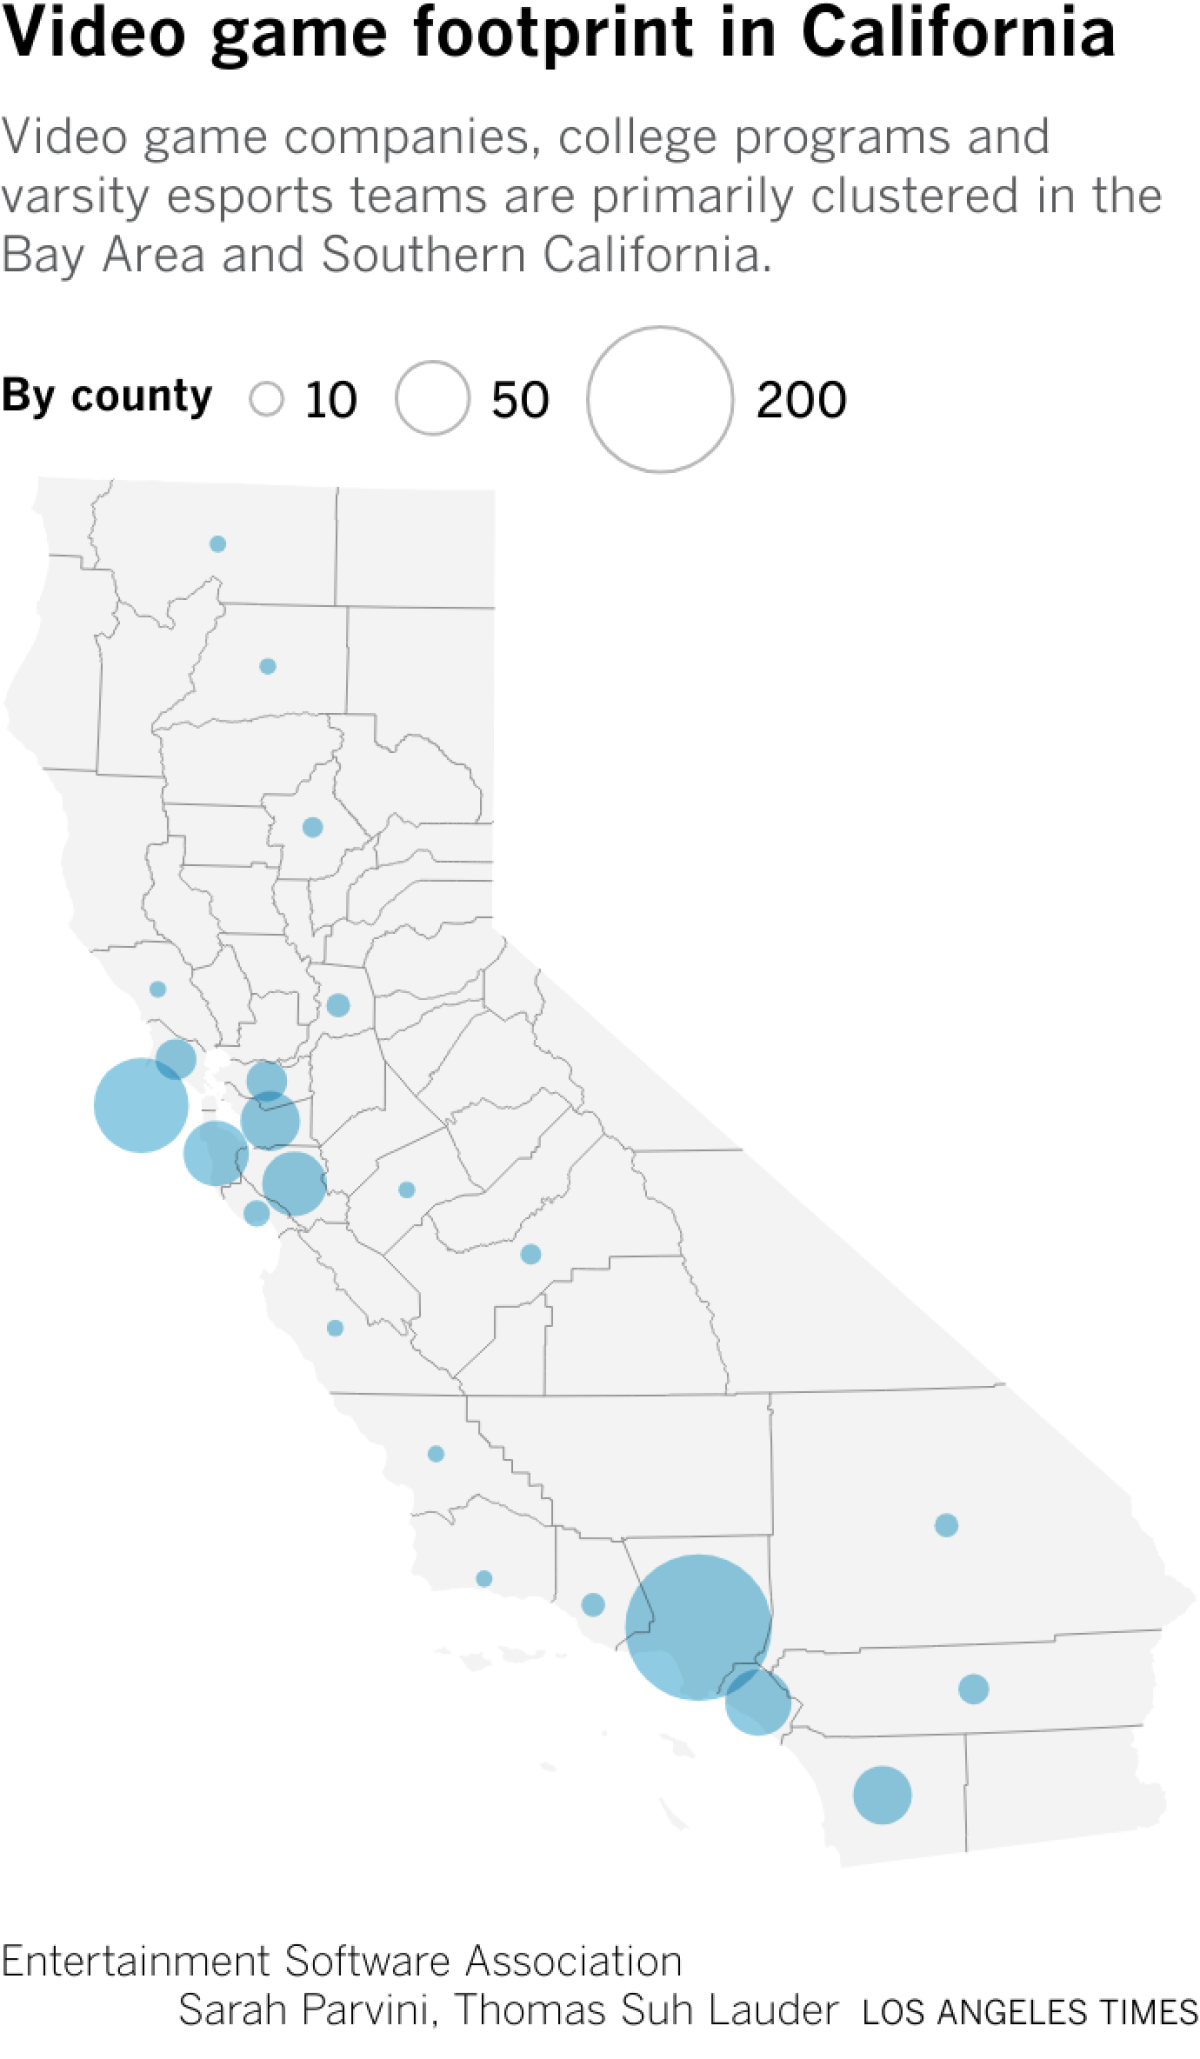 Video game companies, college programs and varsity esports teams are primarily clustered in the Bay Area and Southern California.